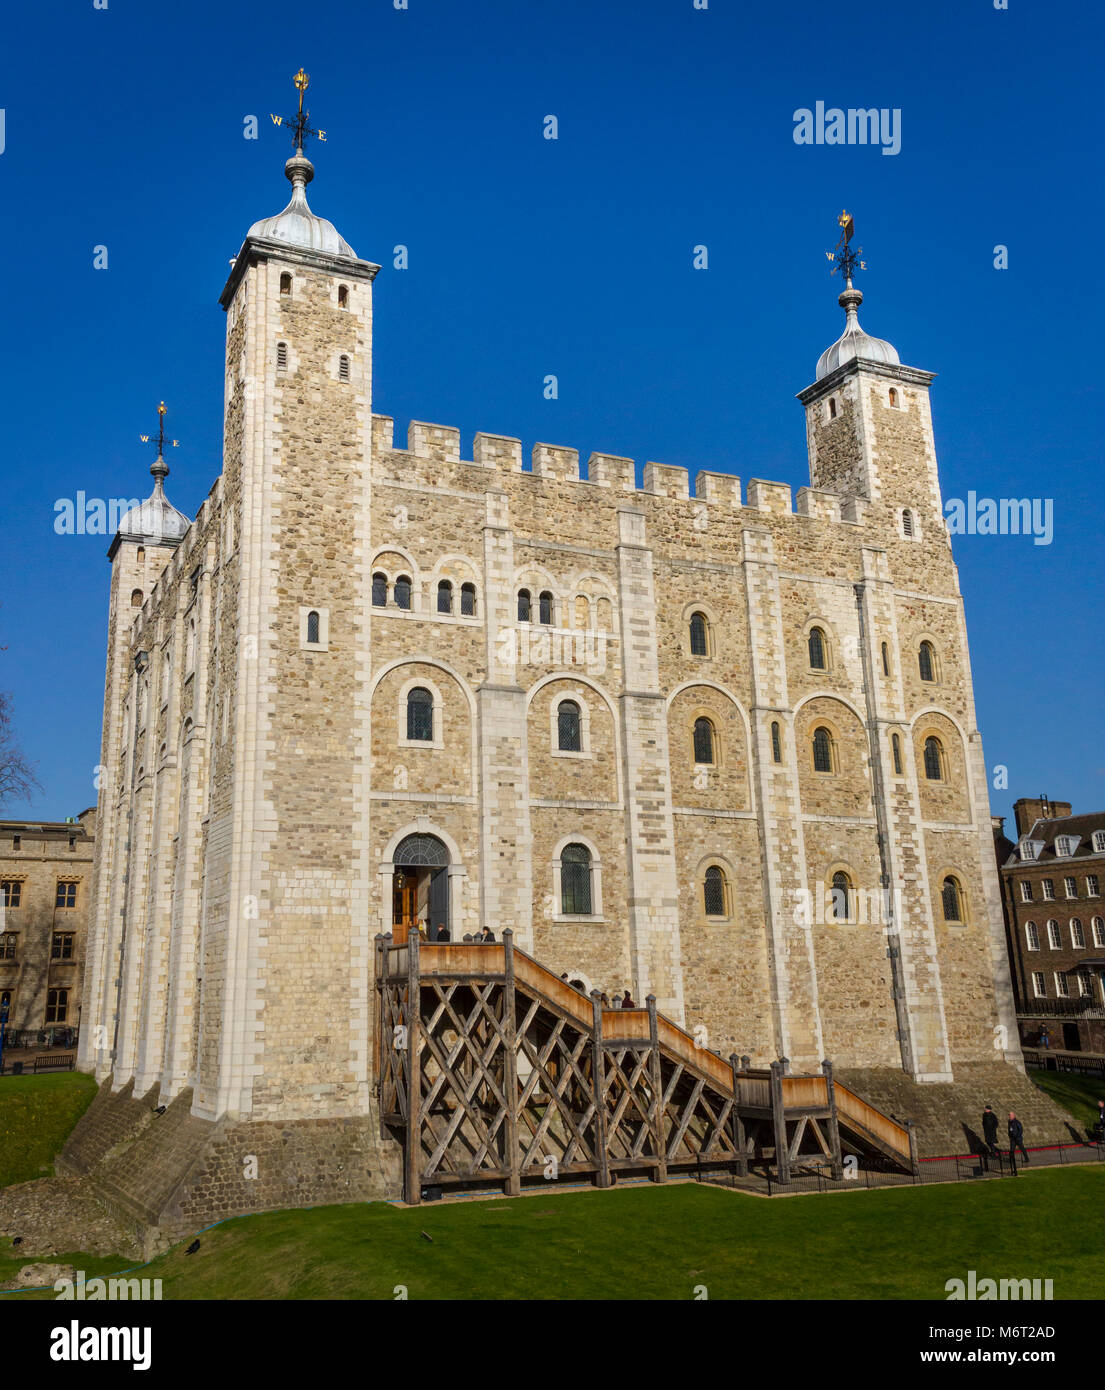 The white tower found within the historic tower of London site in the United Kingdom Stock Photo